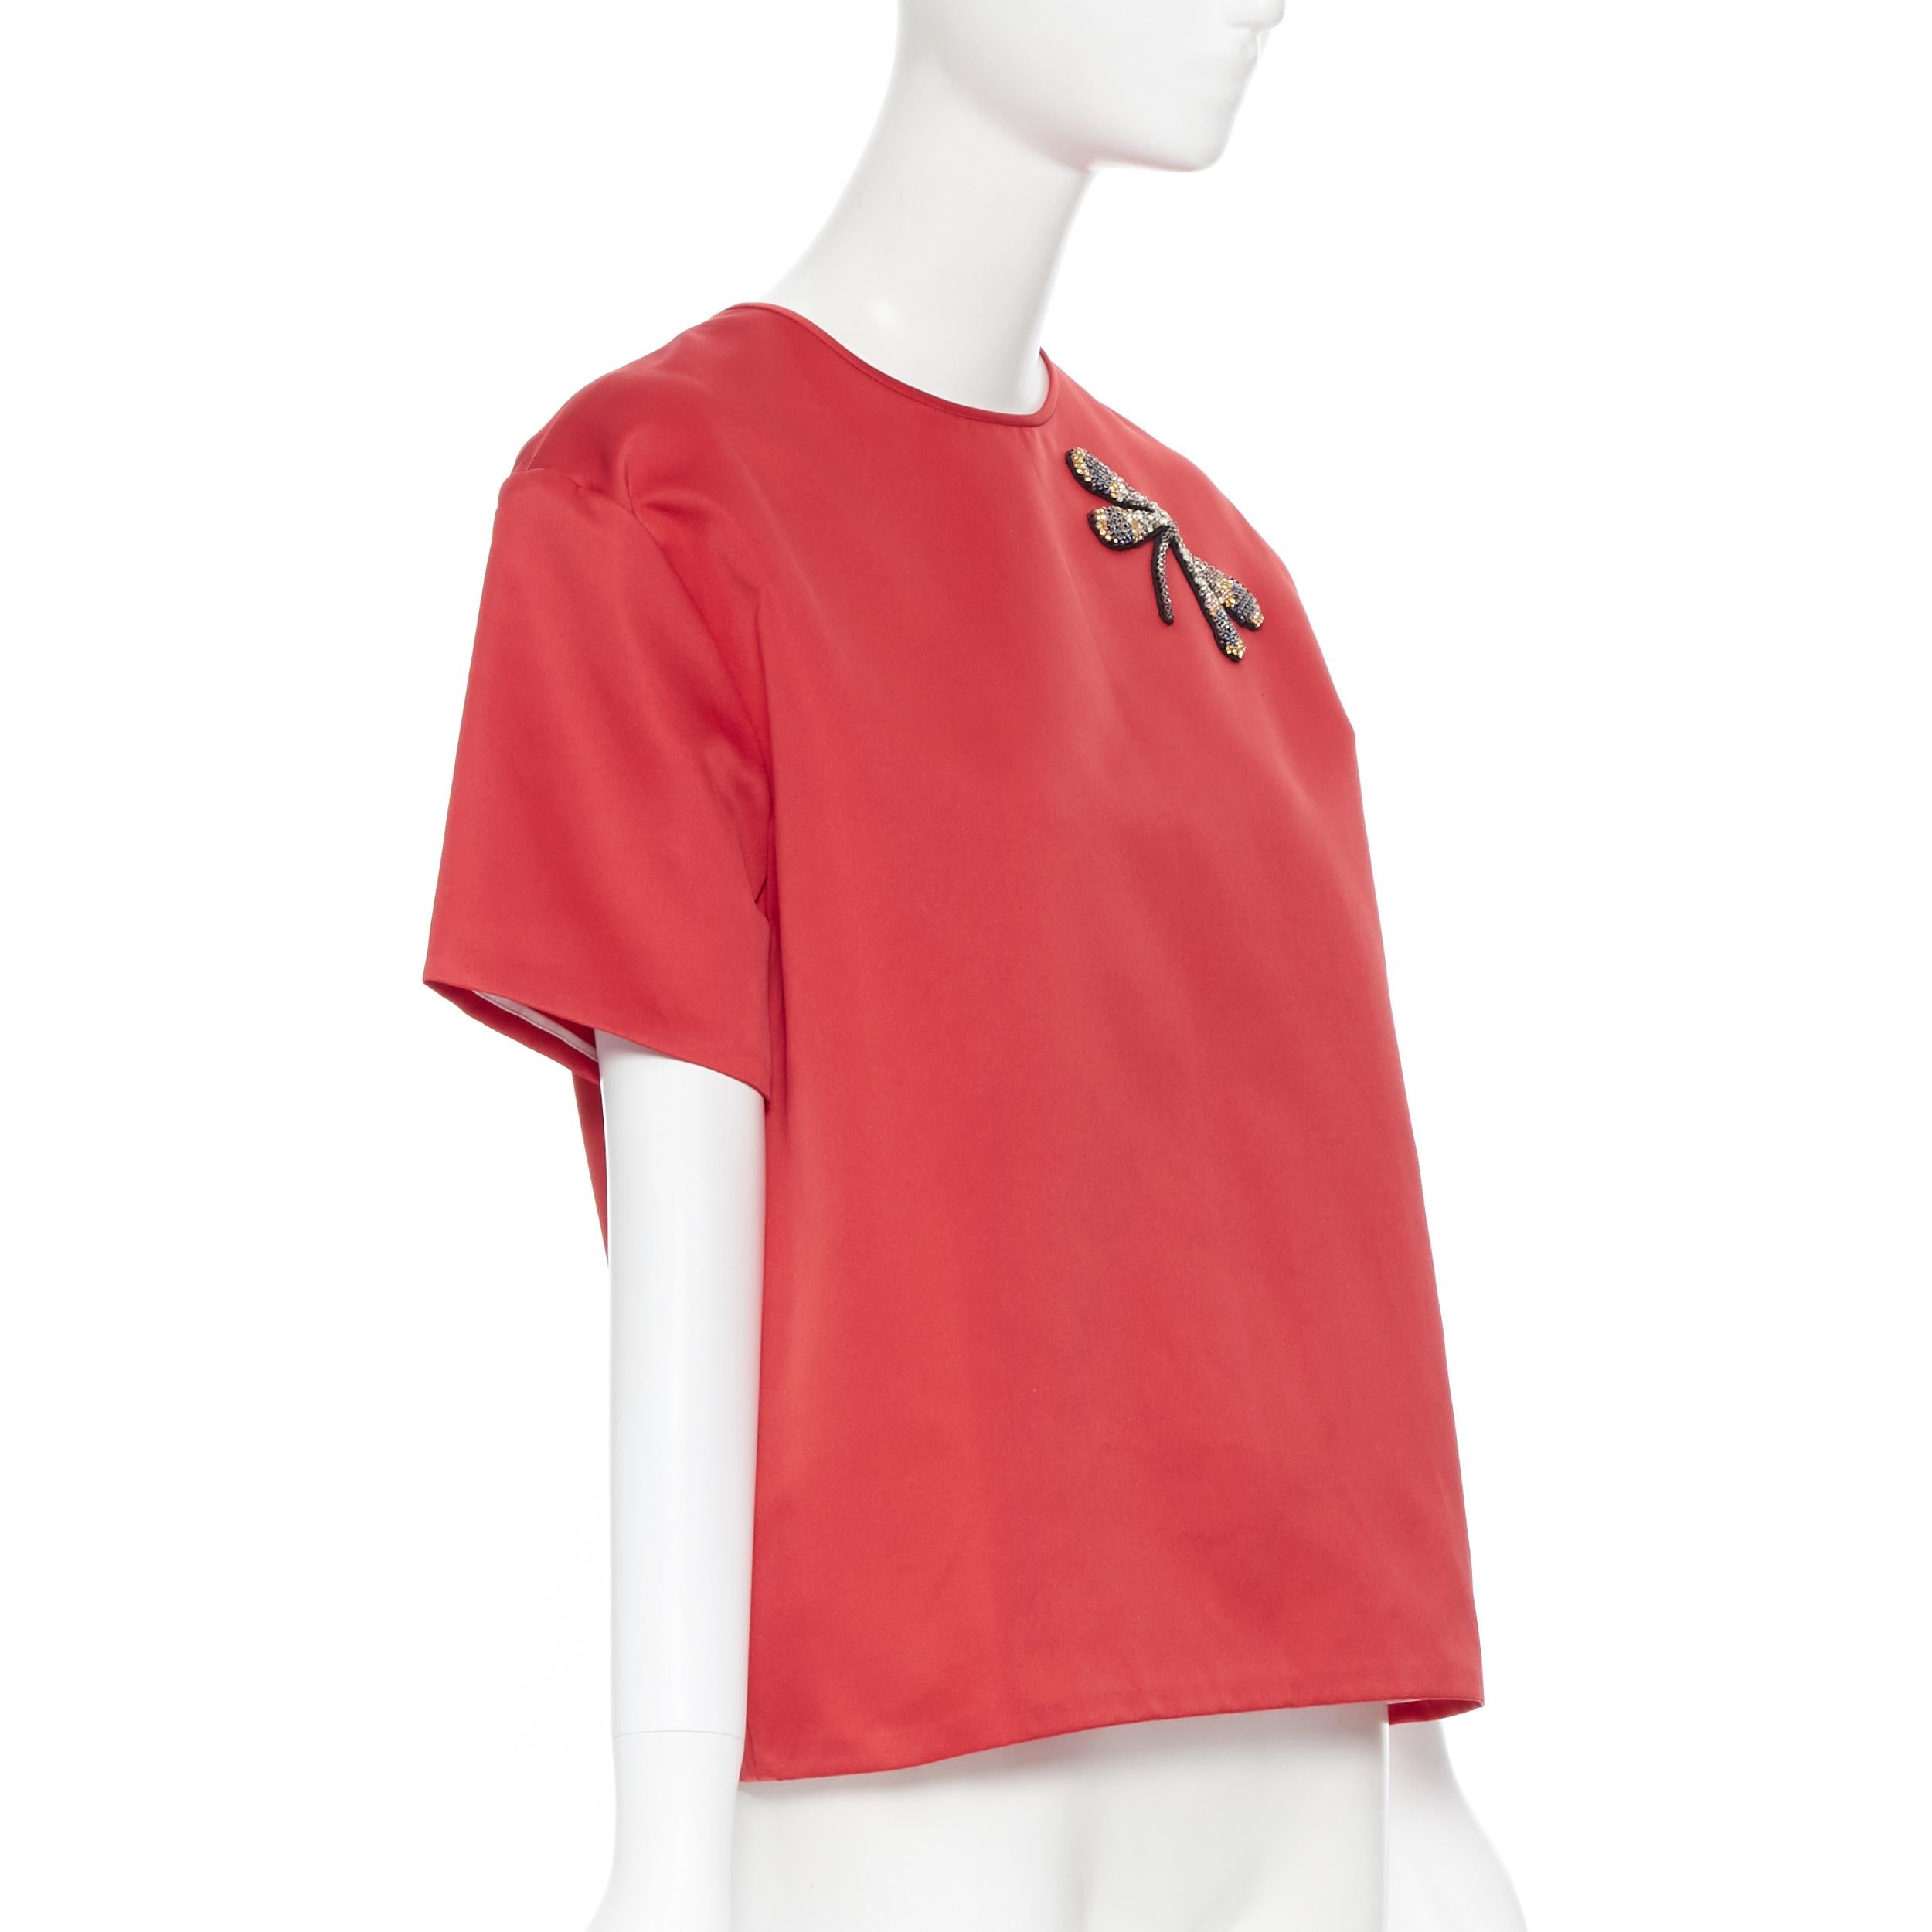 polo shirt with dragonfly logo